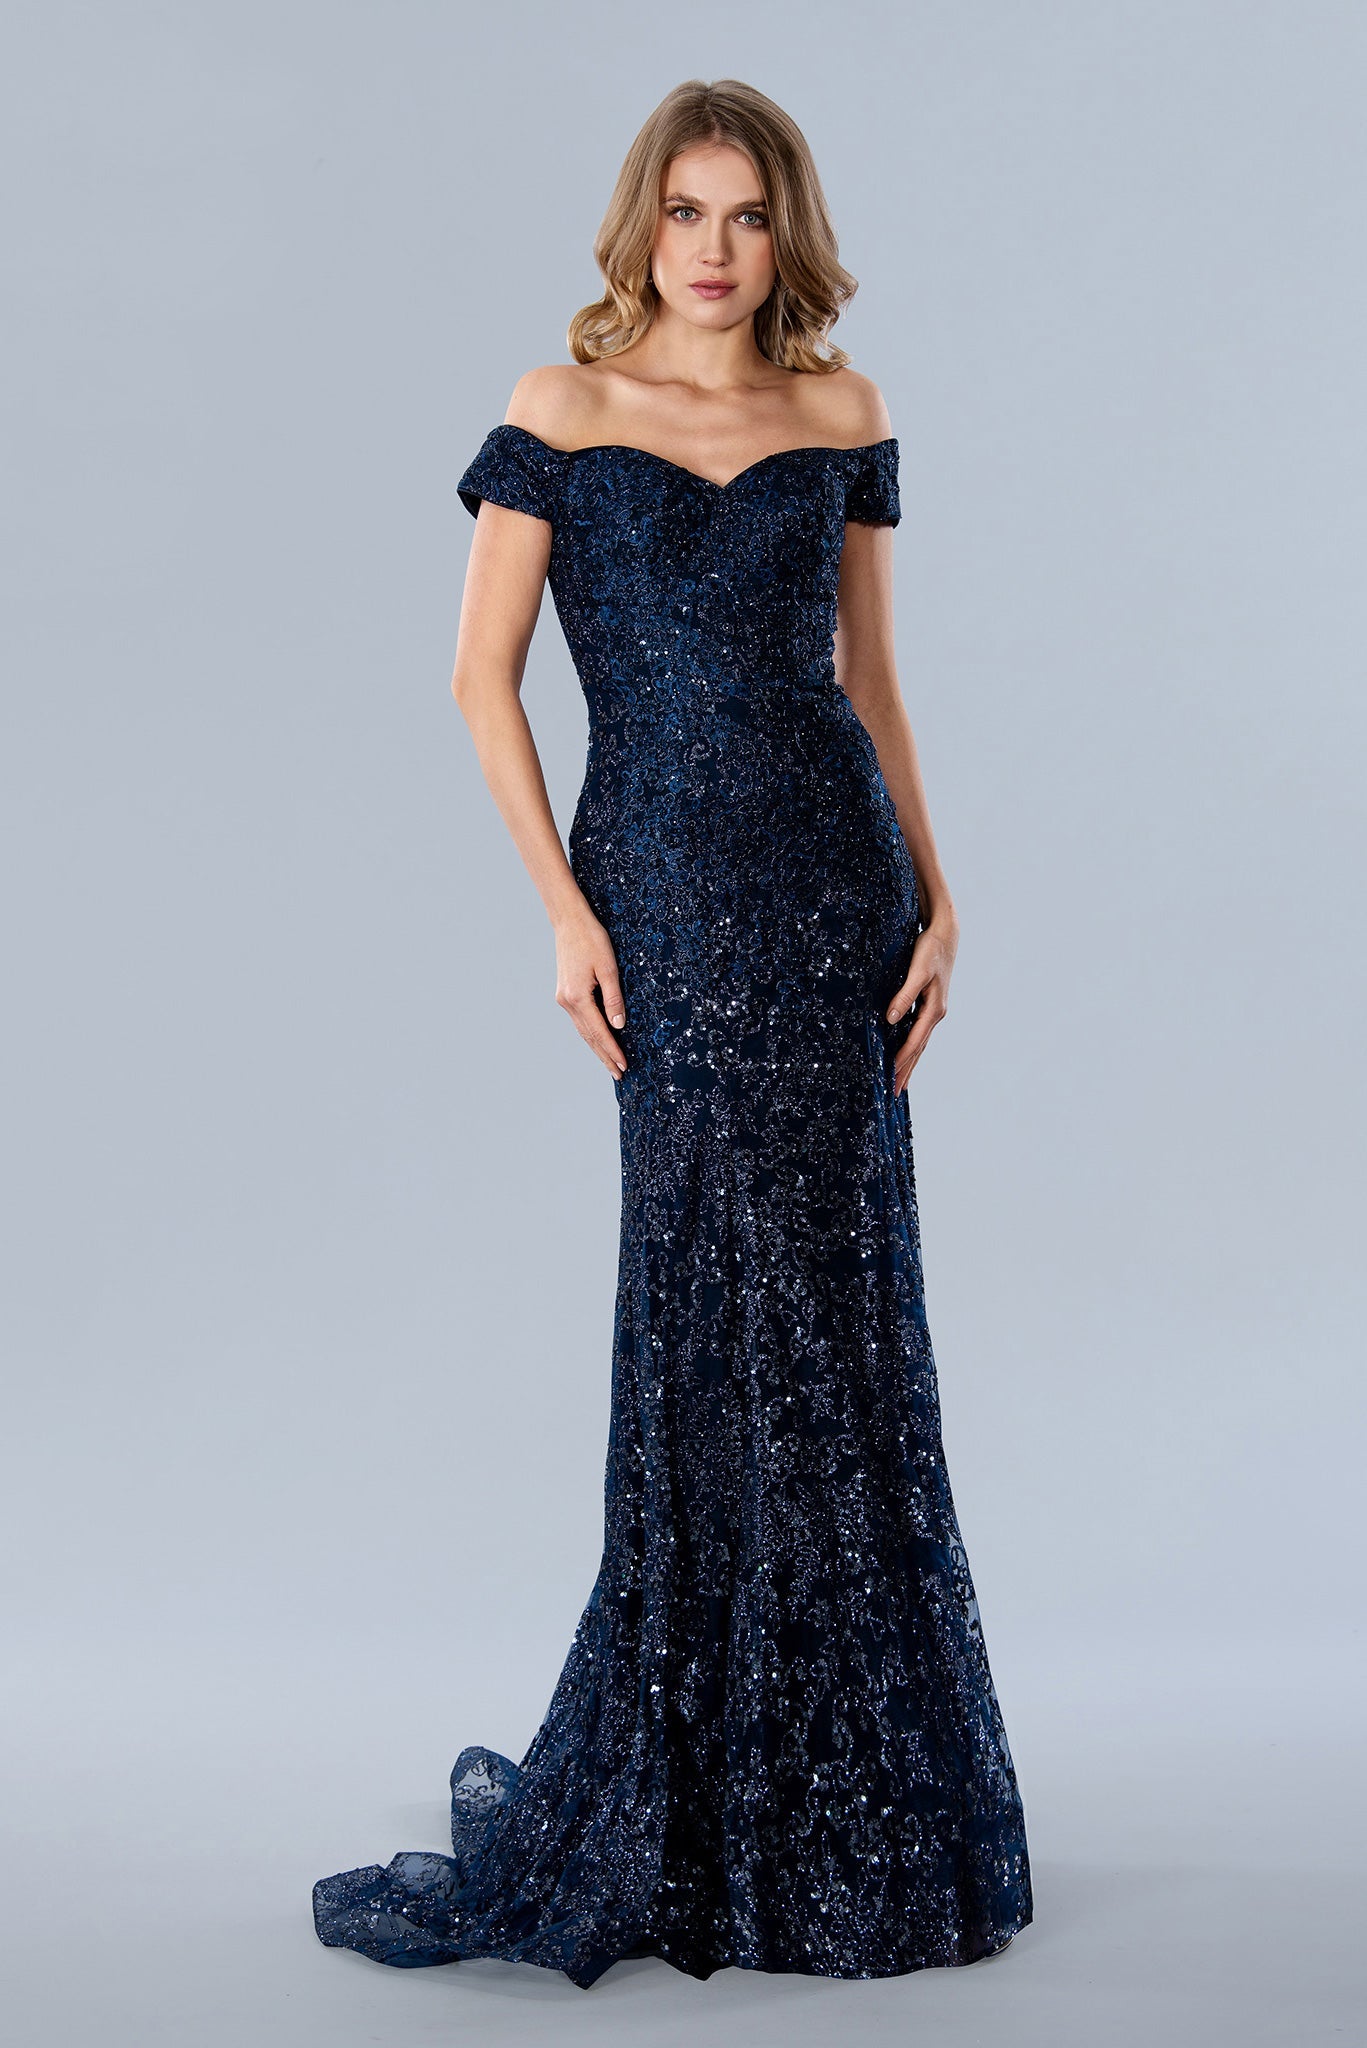 Long Sparkling Evening Gown Prom Dress Navy